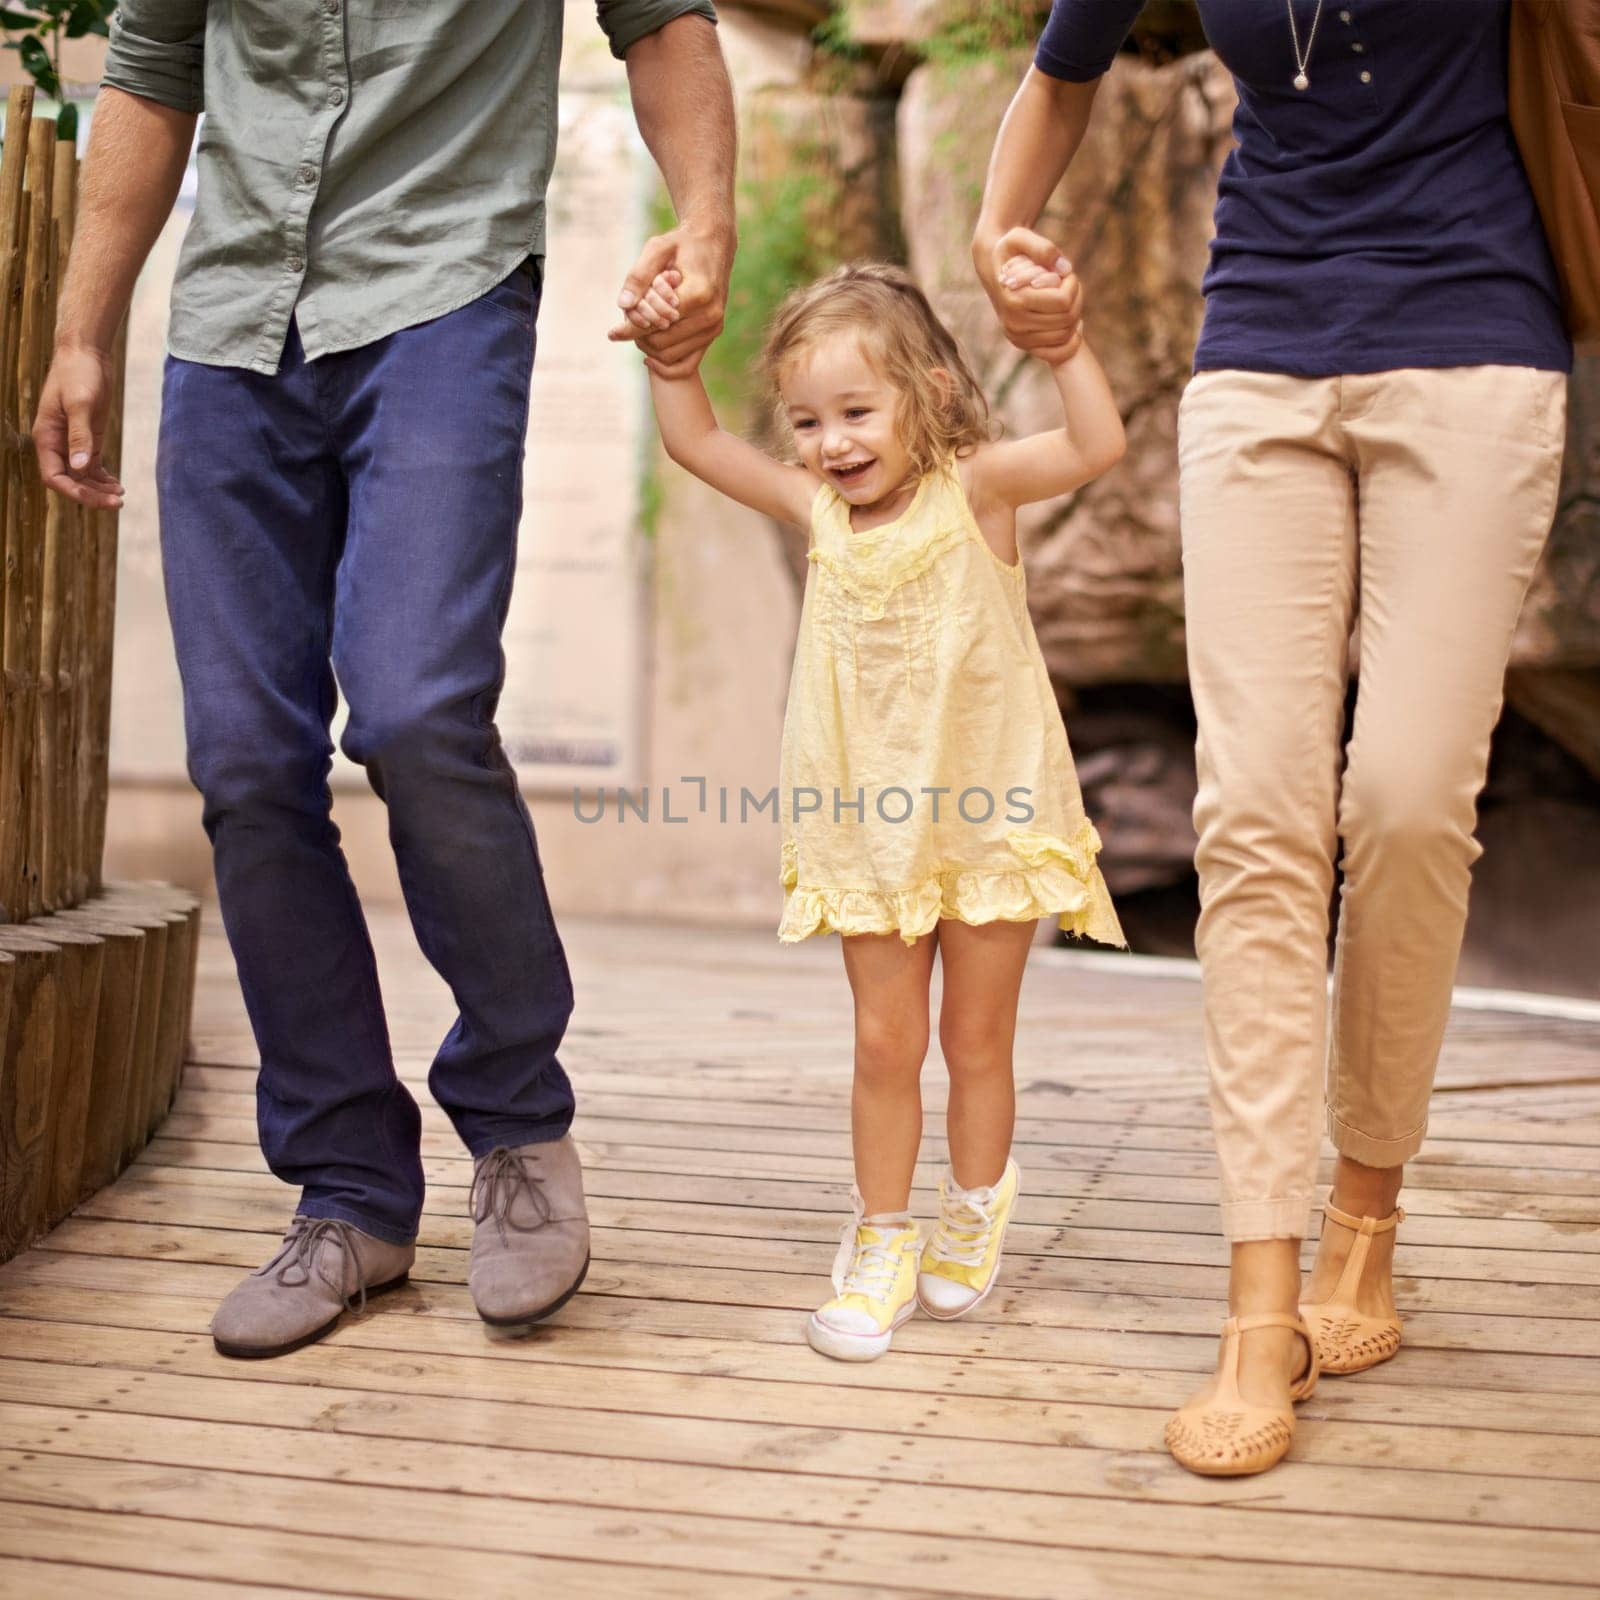 Happy, little girl and holding hands with parents for bonding, adventure or field trip. Excited child or kid walking with mom and dad in travel for fun holiday, weekend or sightseeing together.